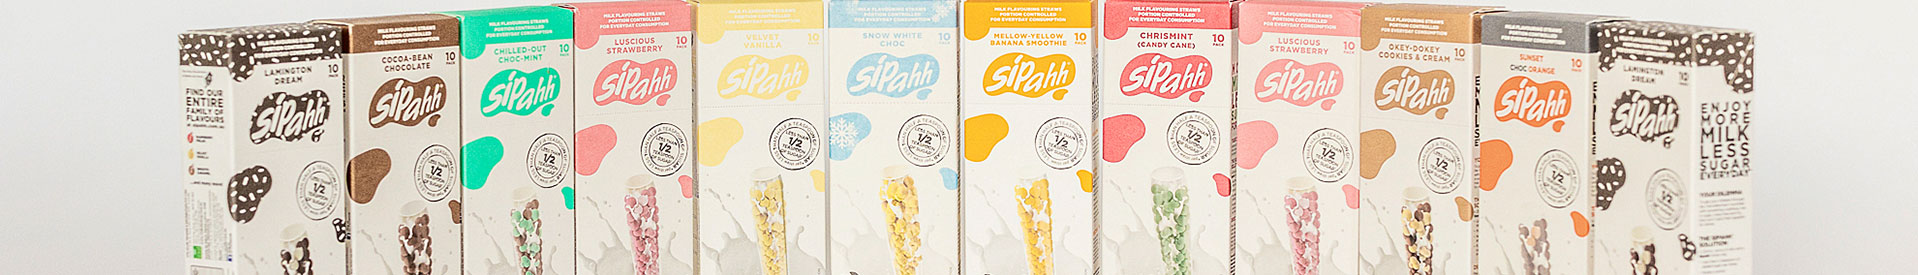 Sipahh-Strawa-all-flavours